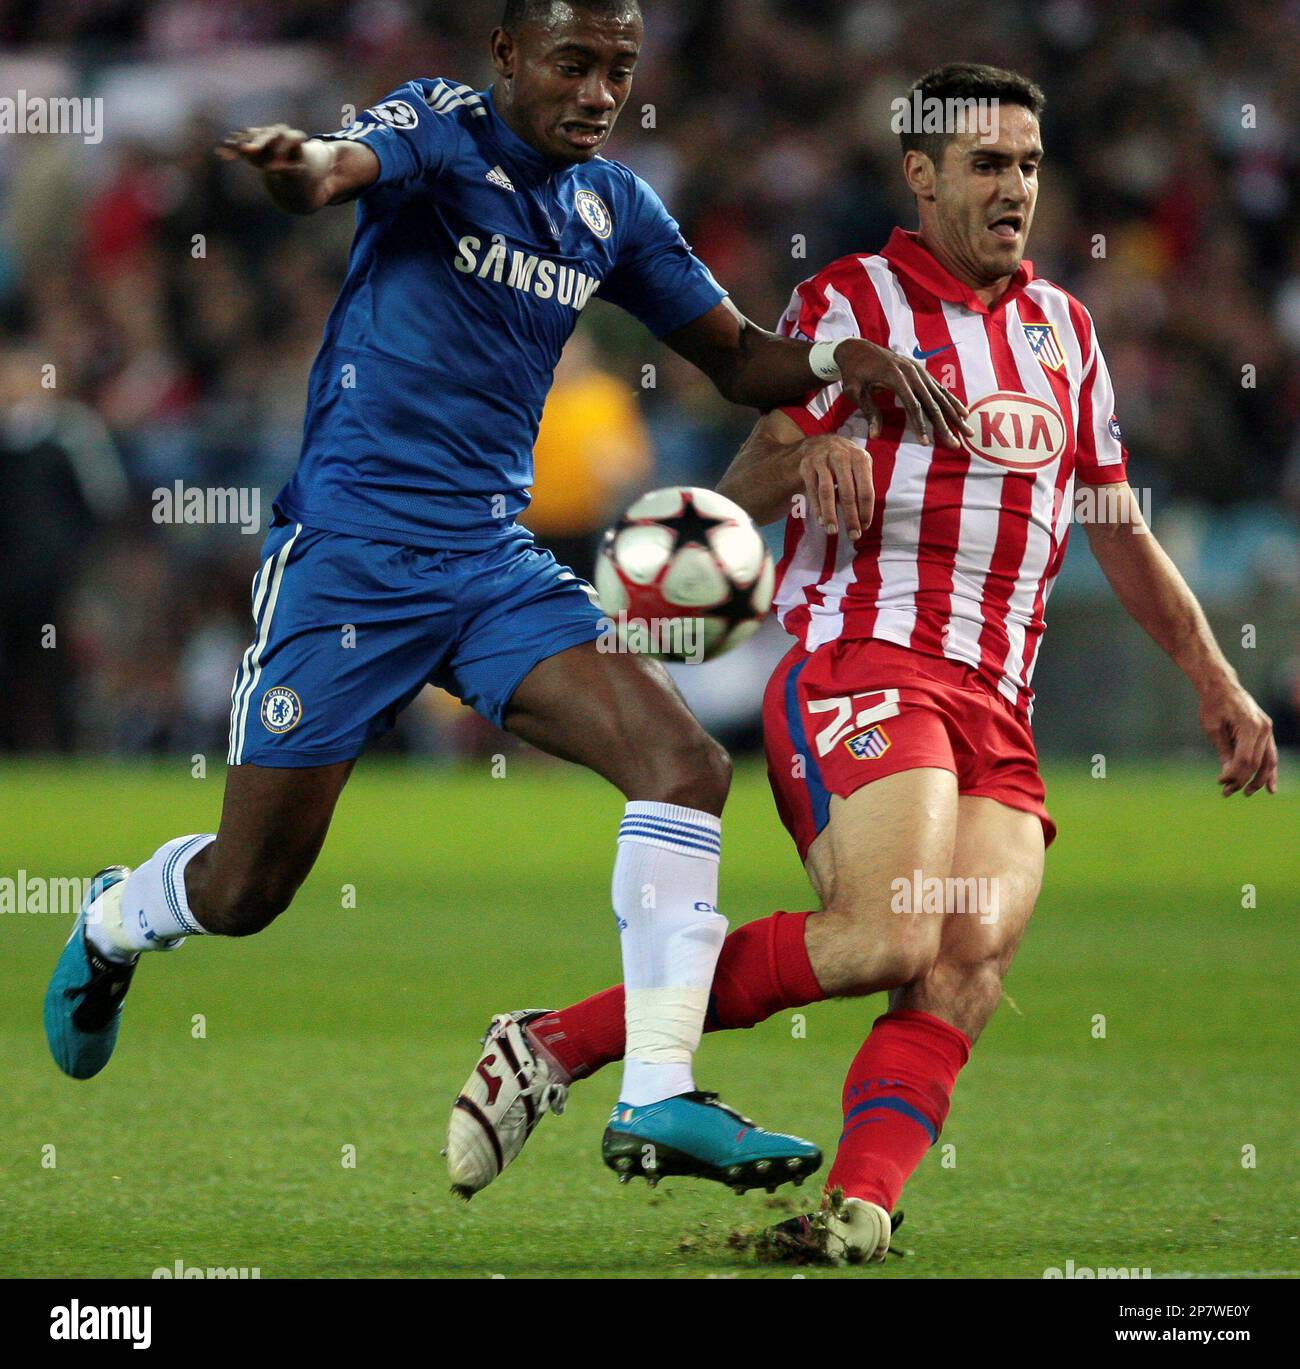 Atletico Madrid's Pablo Ibanez, right, vies for the ball with Chelsea's  Salomon Kalou, from Ivory Coast, during their Group D Champions League  soccer match in Madrid, Tuesday Nov. 3, 2009. (AP Photo/Arturo